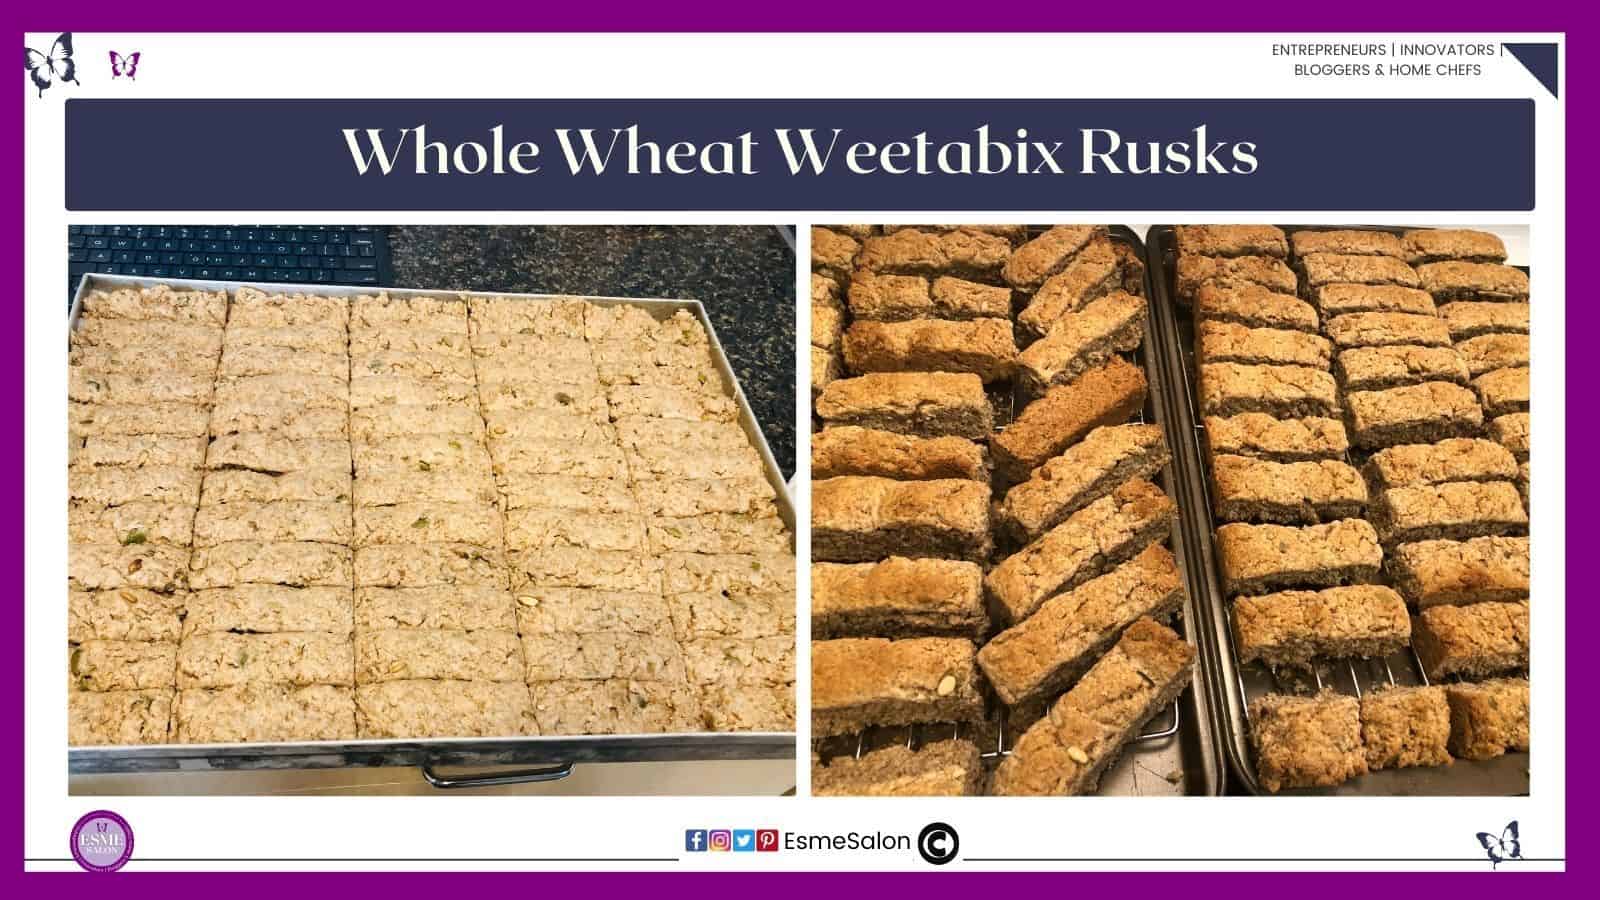 an image of a baking tray filled with Whole Wheat Weetabix Rusks ready to be baked and be dried out